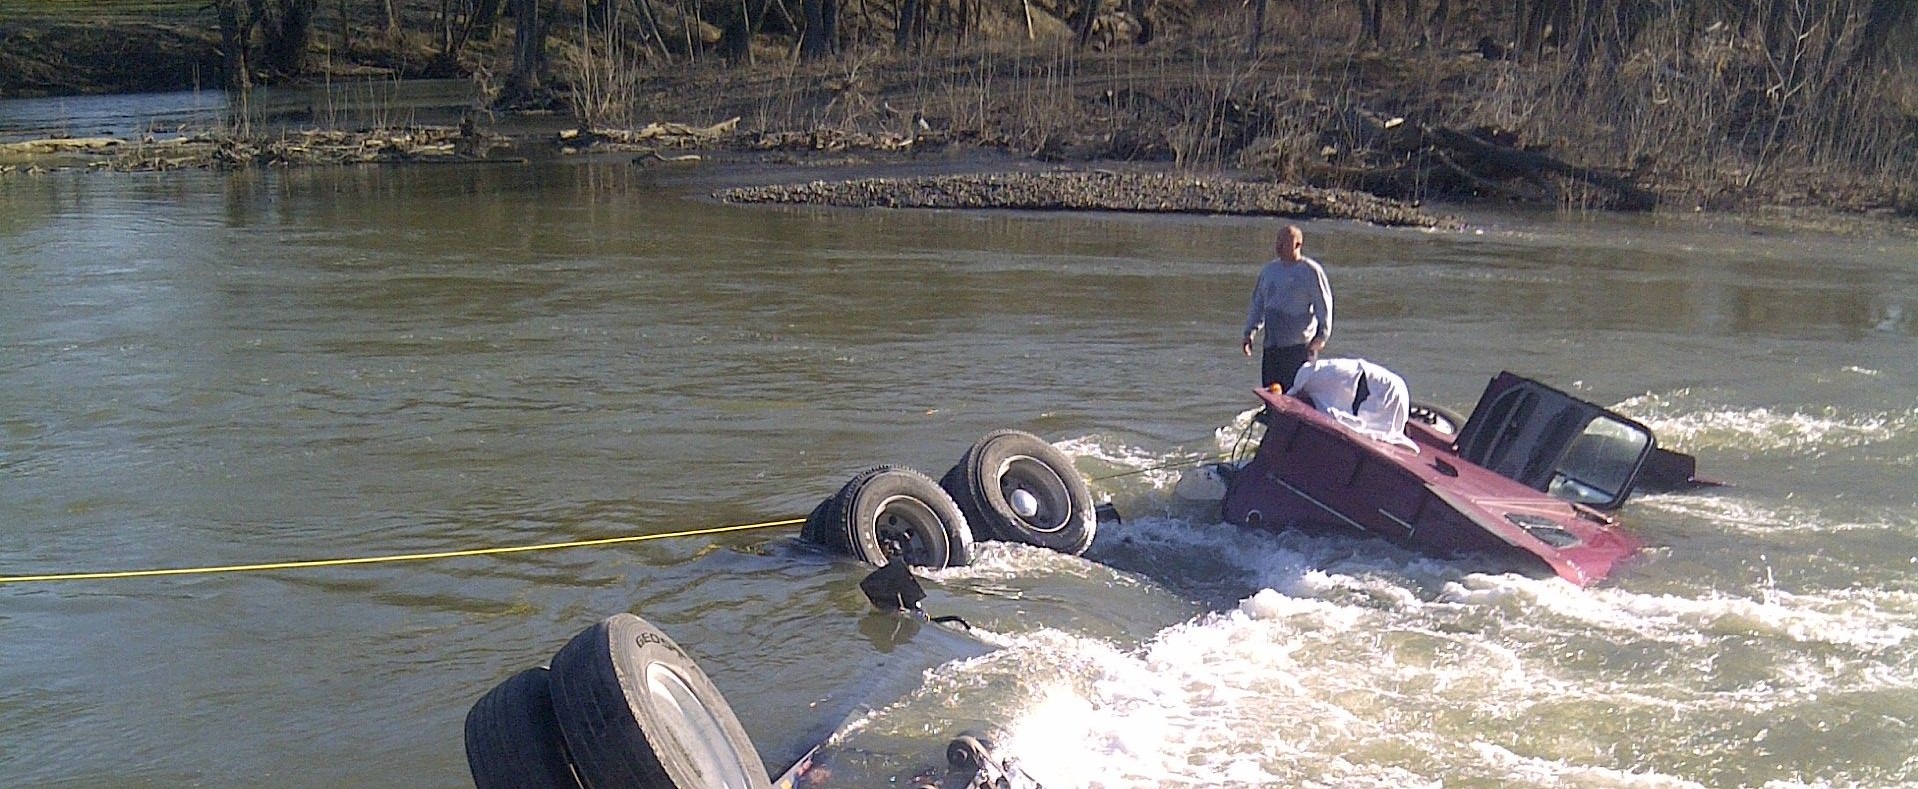 A truck laying on its side, mostly under water in a river.